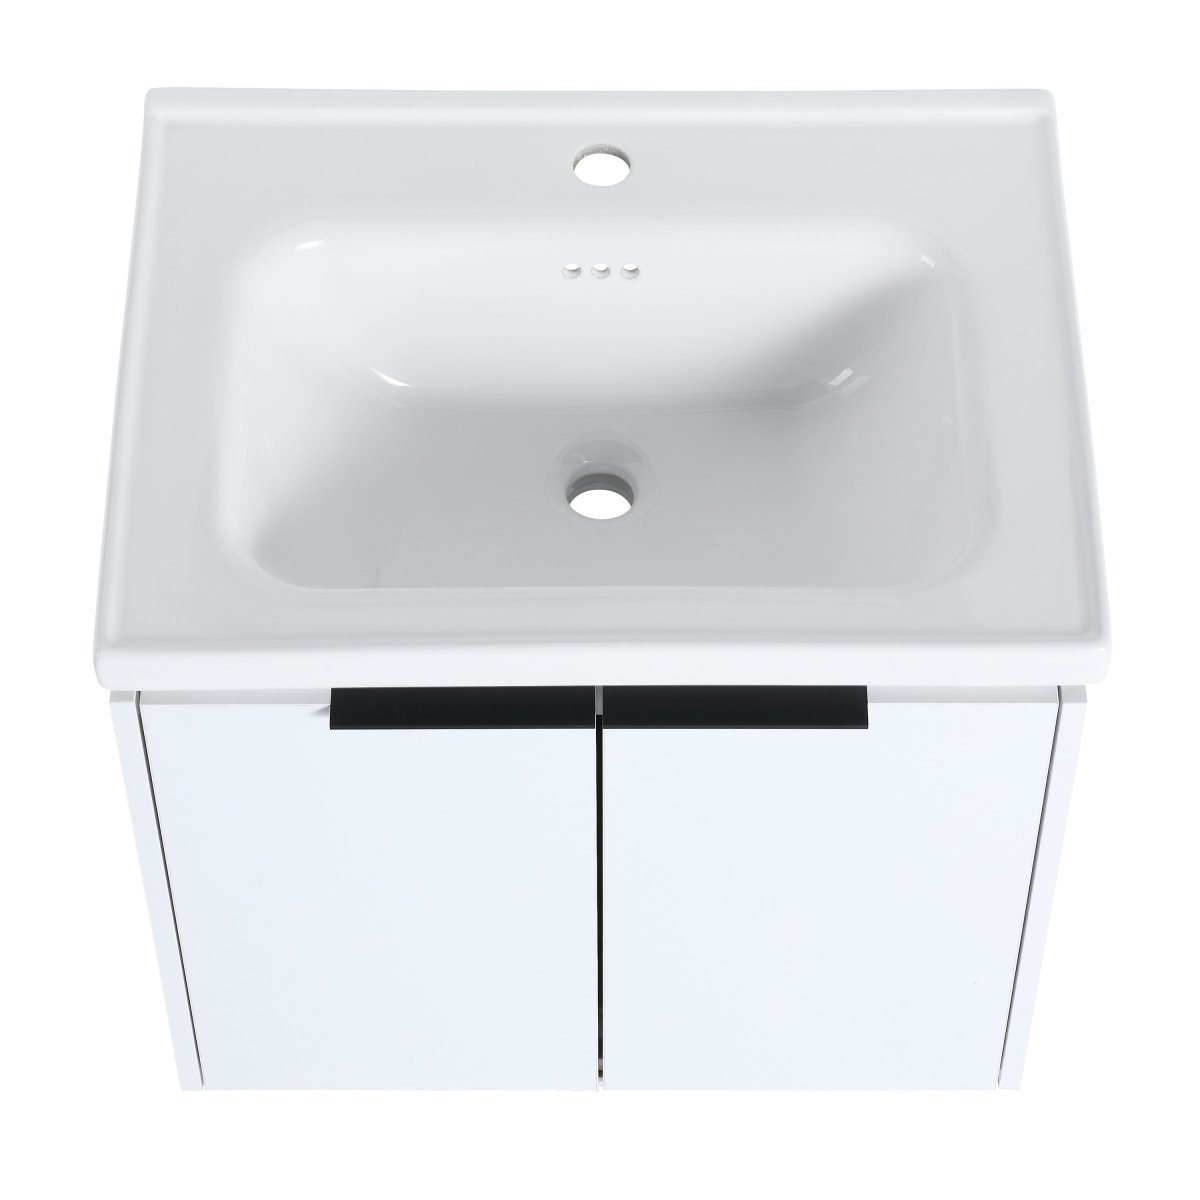 Exbrite 48 Inch Soft Close Doors Bathroom Vanity With Sink, and Two Small Storage Shelves